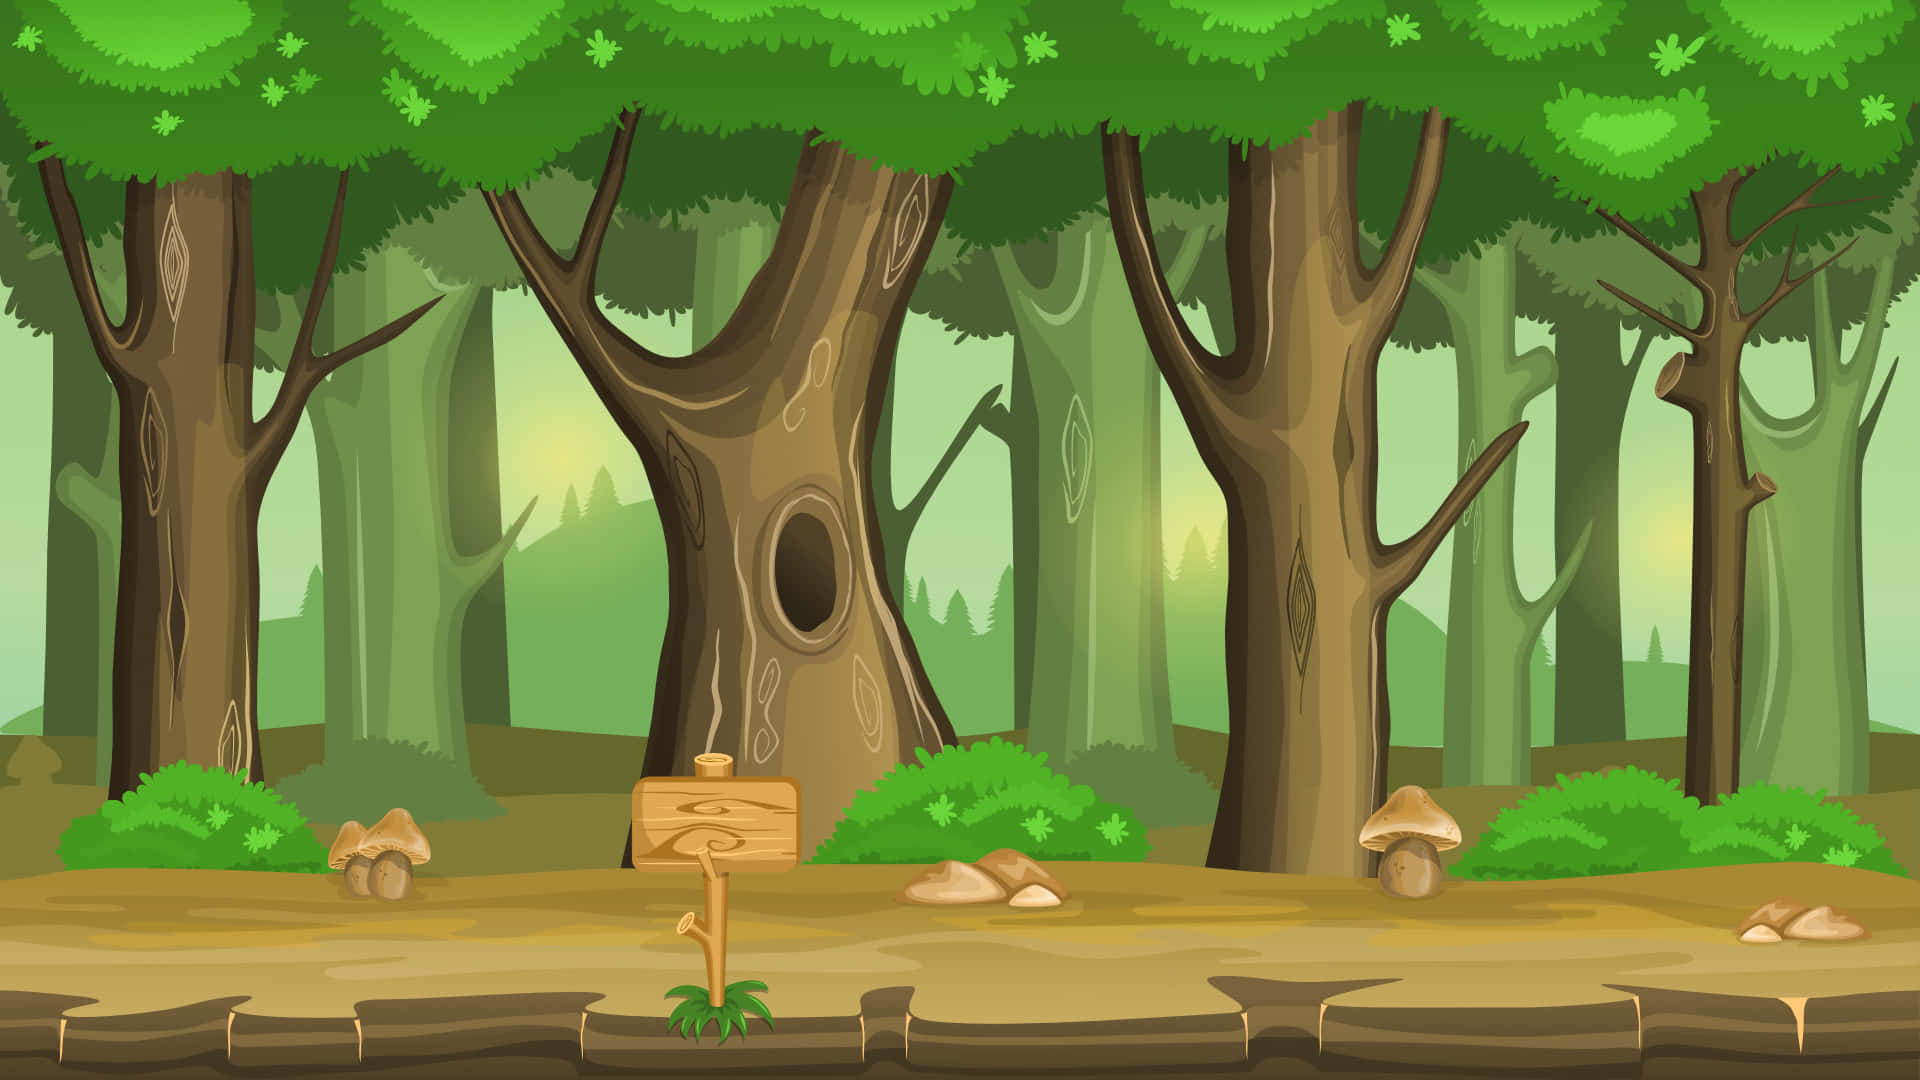 Explore the depths of Cartoon Forest